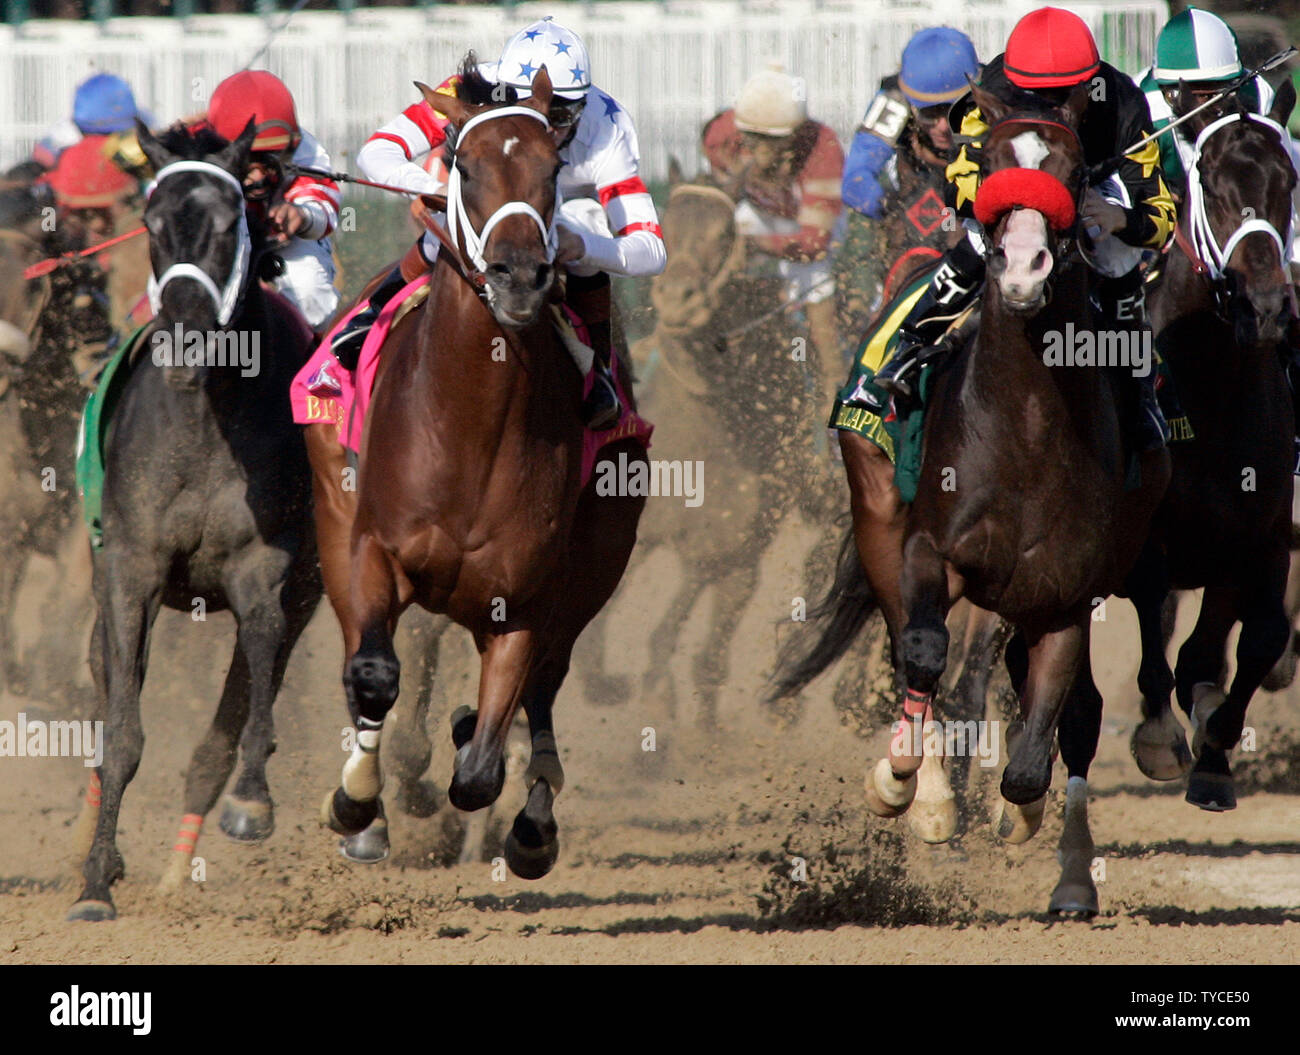 Big Brown, with jockey Kent Desormeaux up (C) leads the pack around the final turn en route to winning the 134th running of the Kentucky Derby at Churchill Downs in Louisville, Kentucky on May 3, 2008. (UPI Photo/Frank Polich) Stock Photo